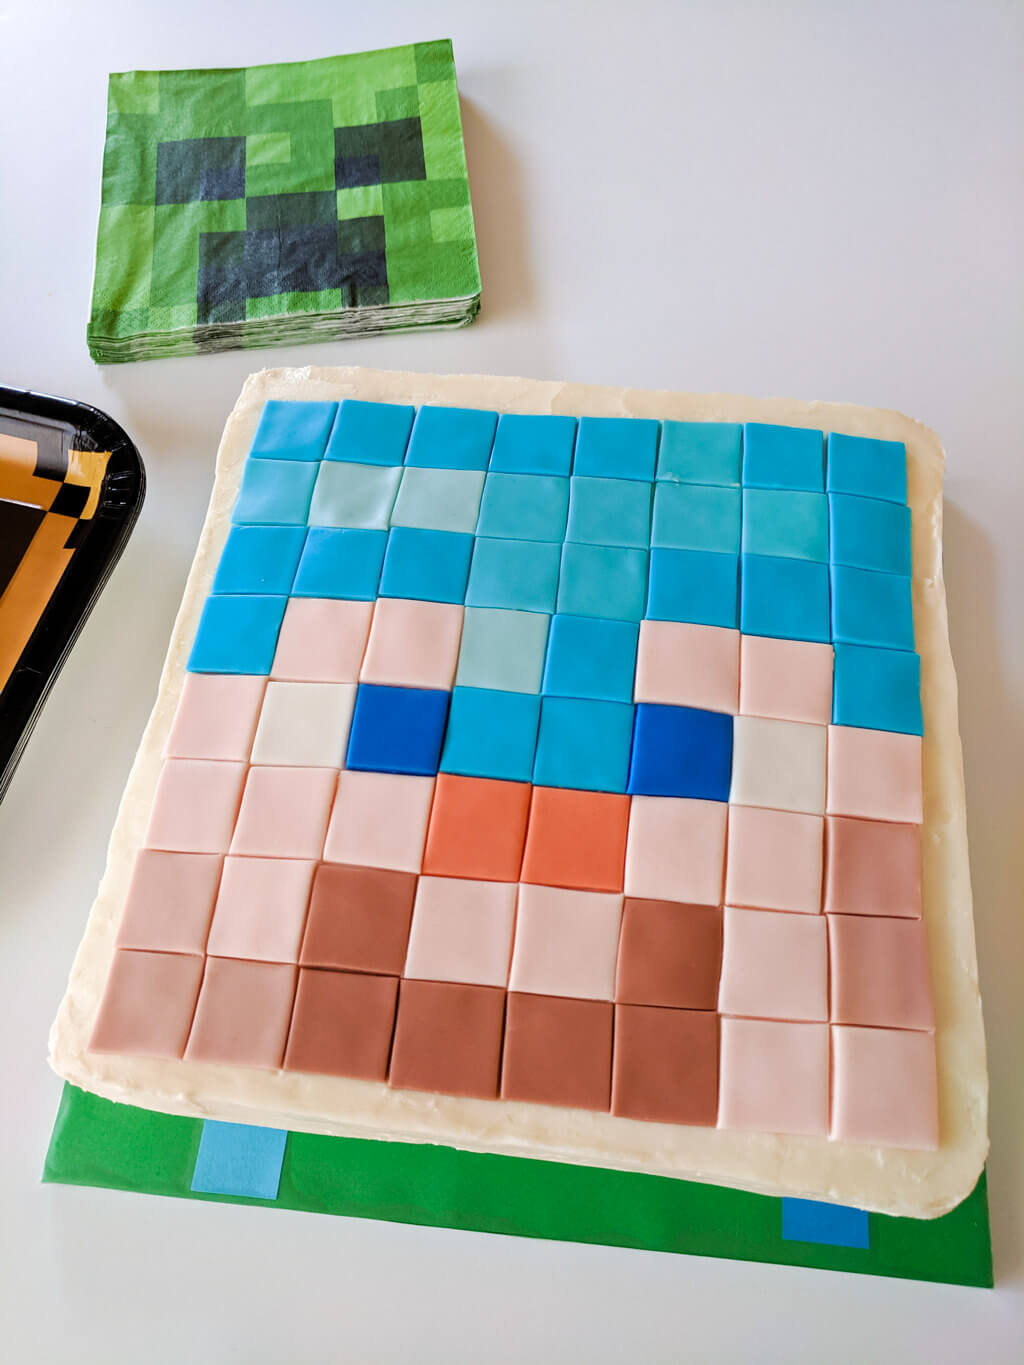 How to bake a cake in Minecraft | GPORTAL Wiki